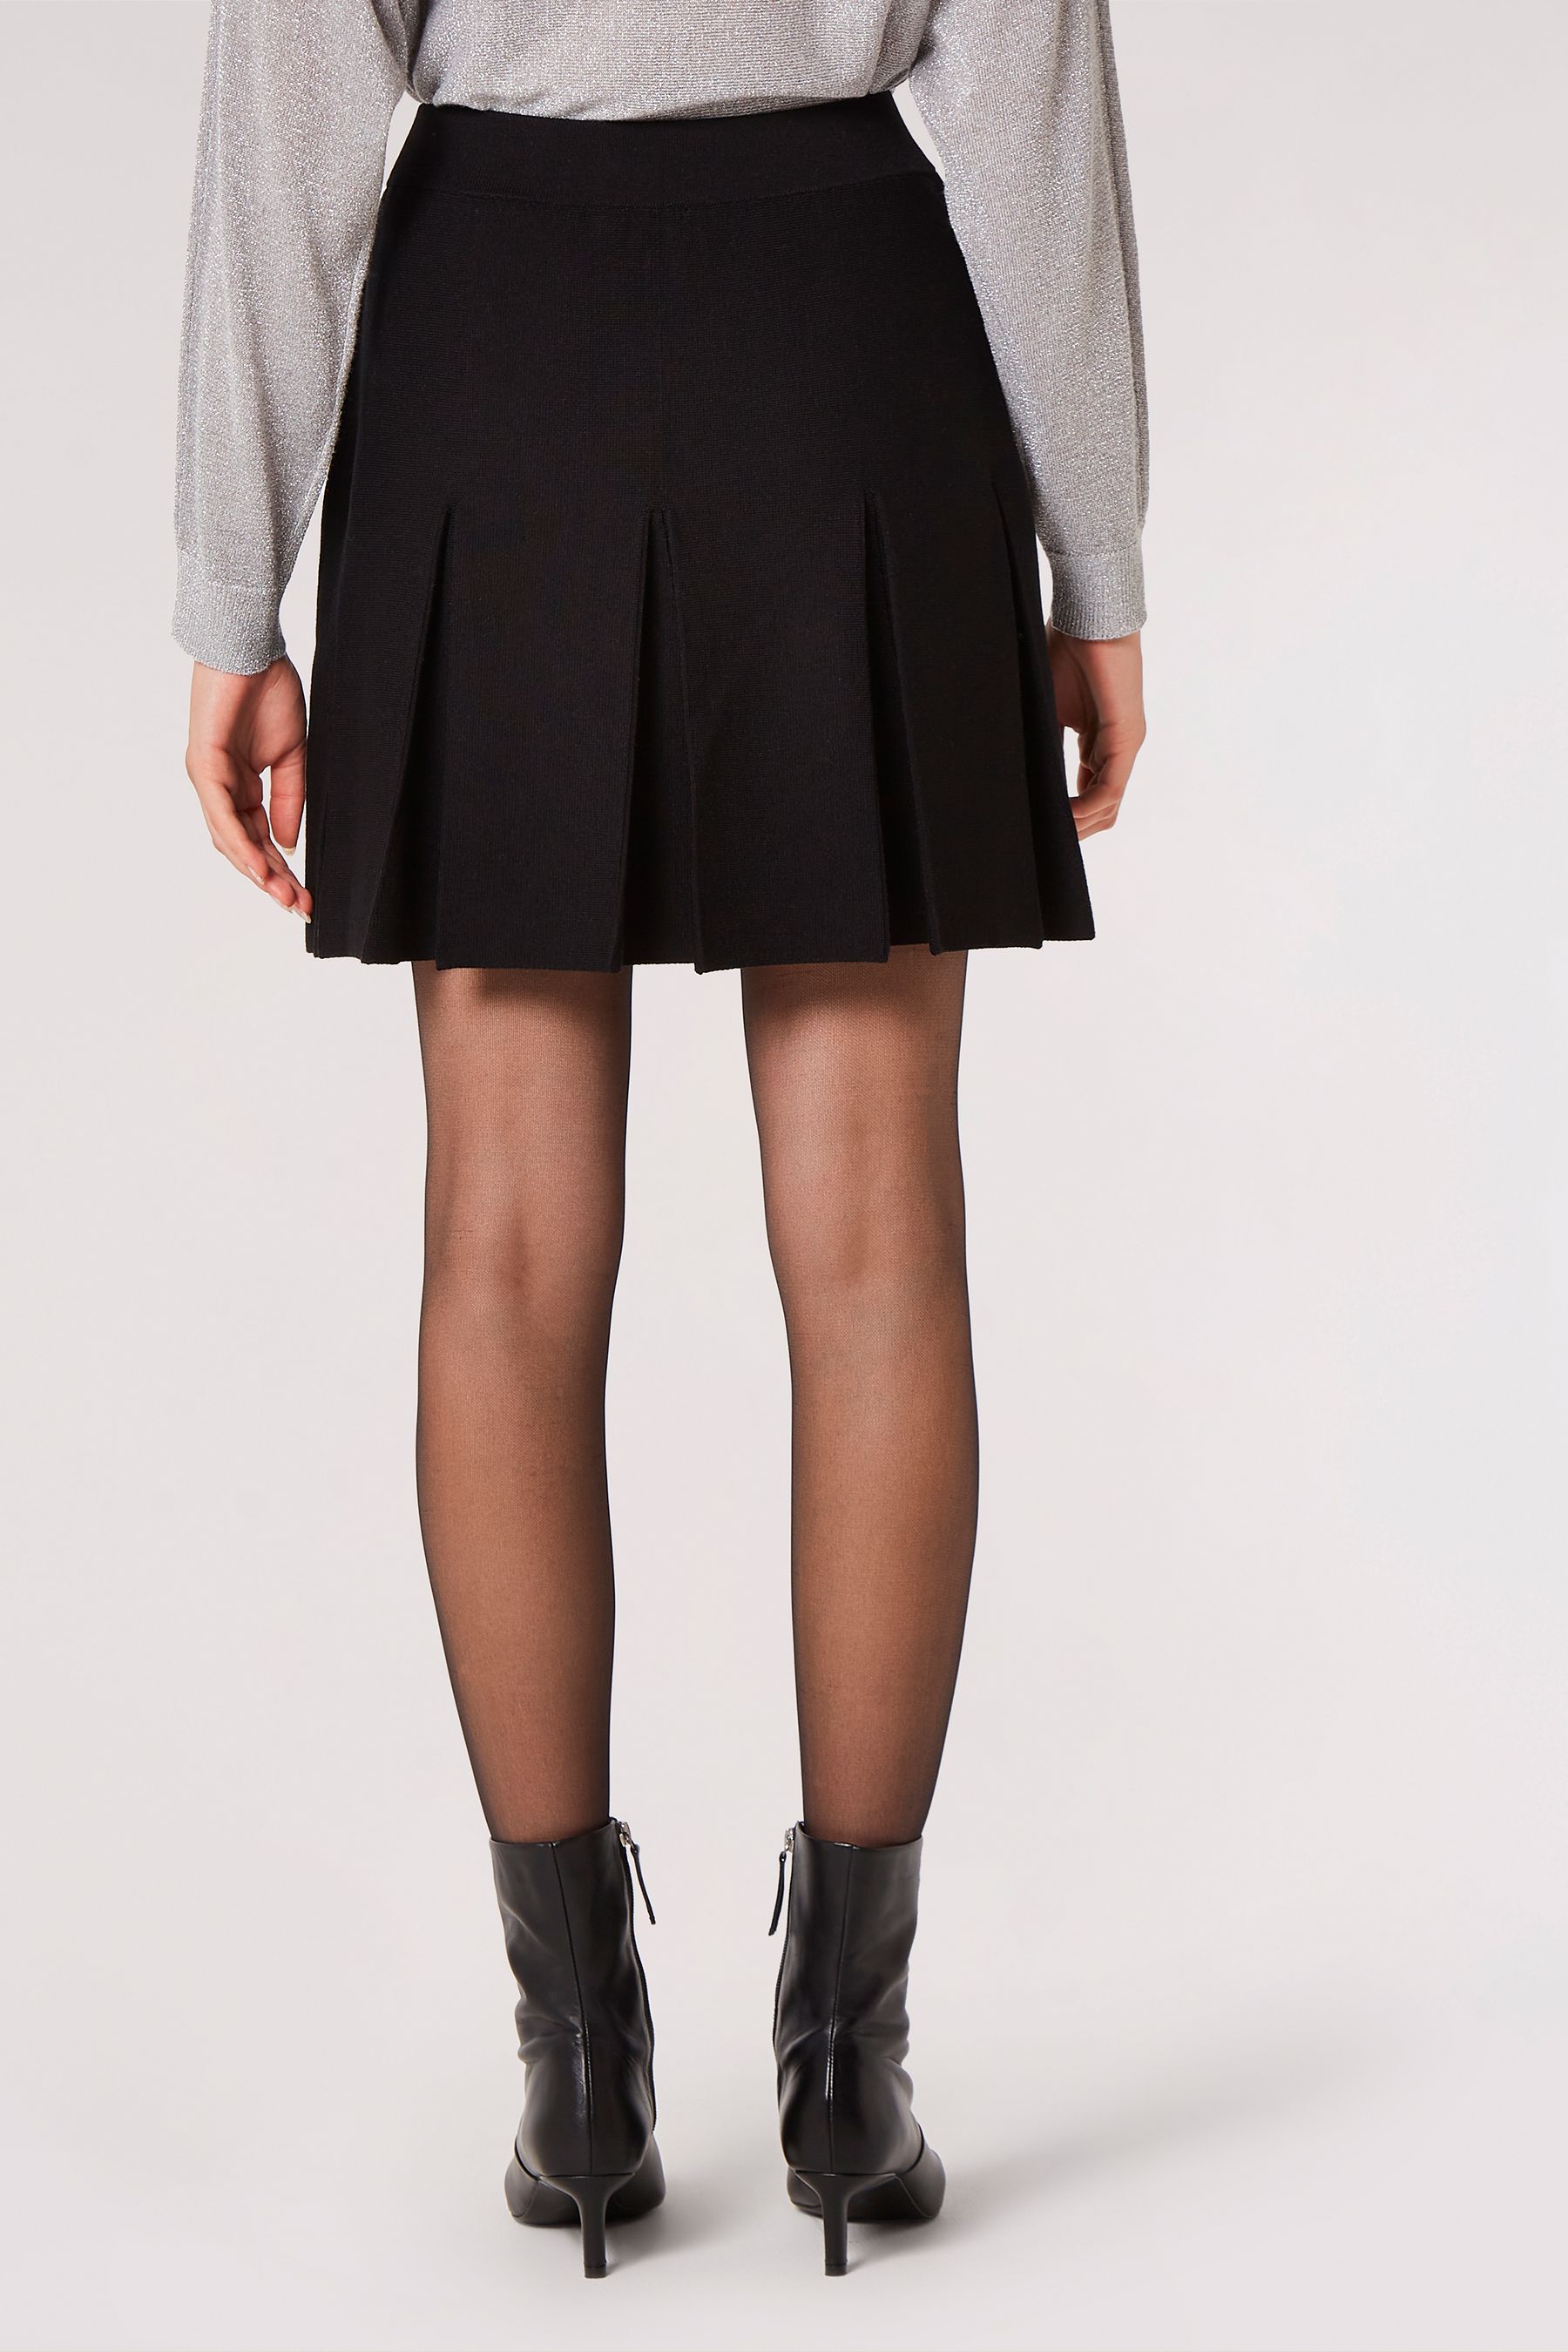 Buy Apricot Black Knitted Pleat Detail Black Skirt from the Next UK ...